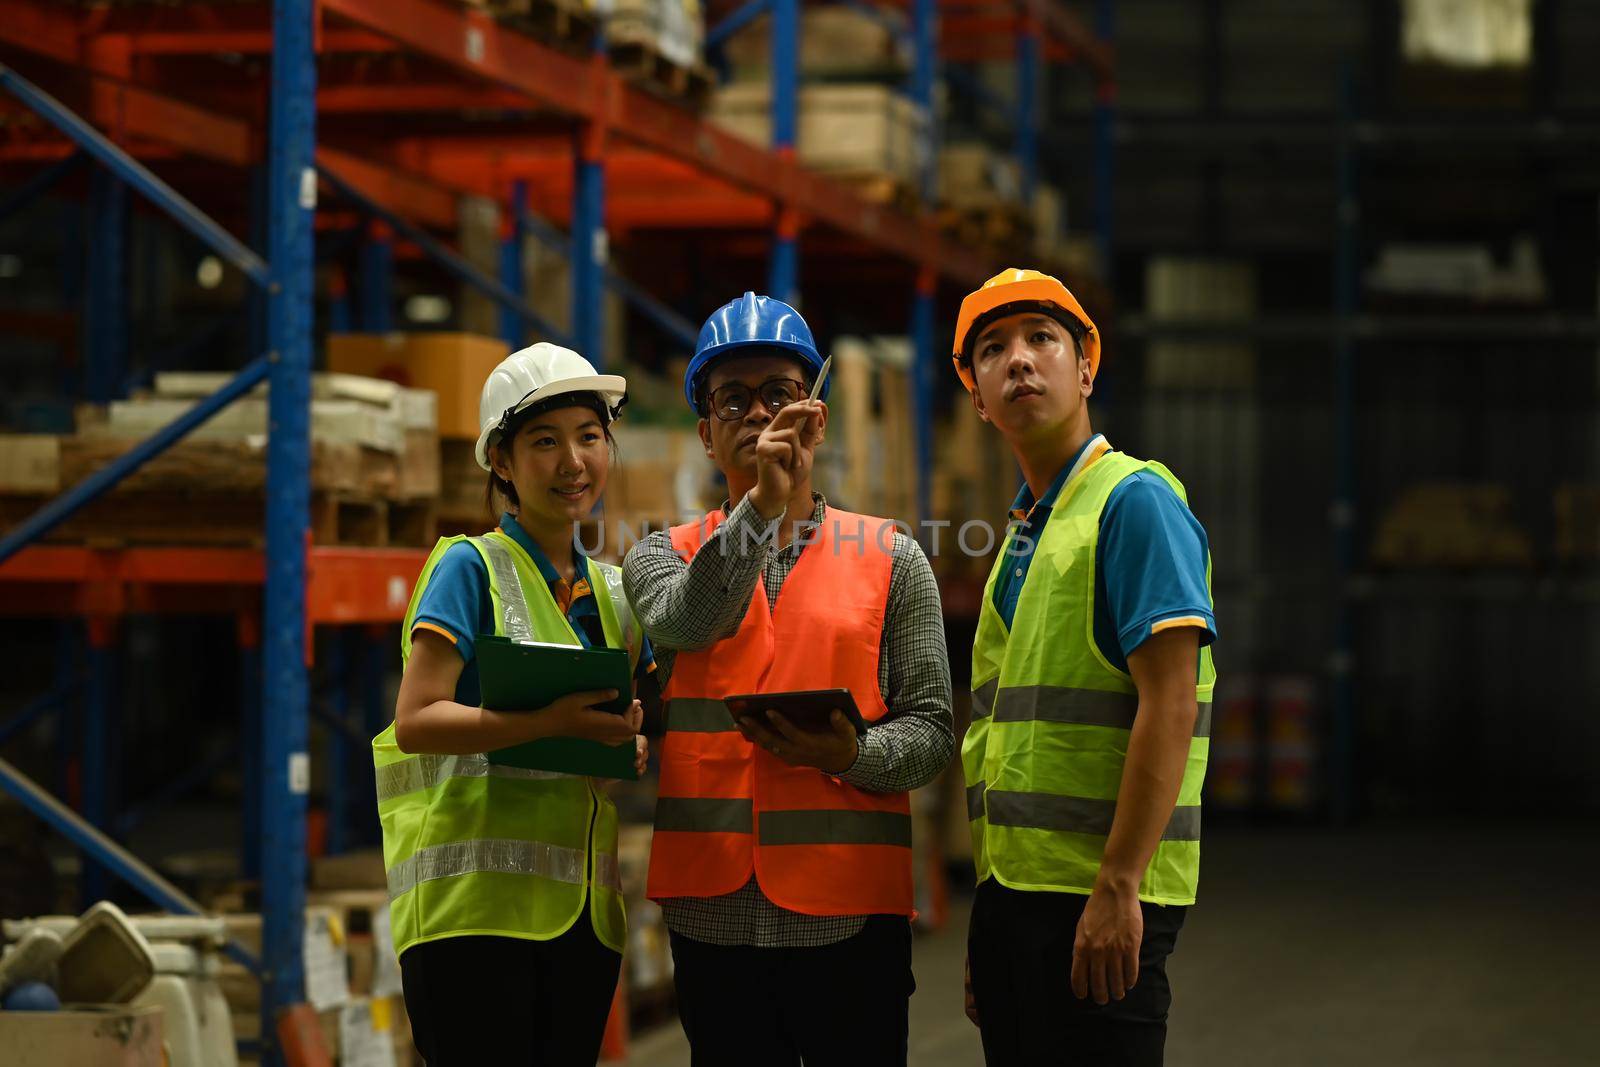 Warehouse workers and middle age manager standing between rows of tall shelves and analyzing newly arrived goods on tablet.